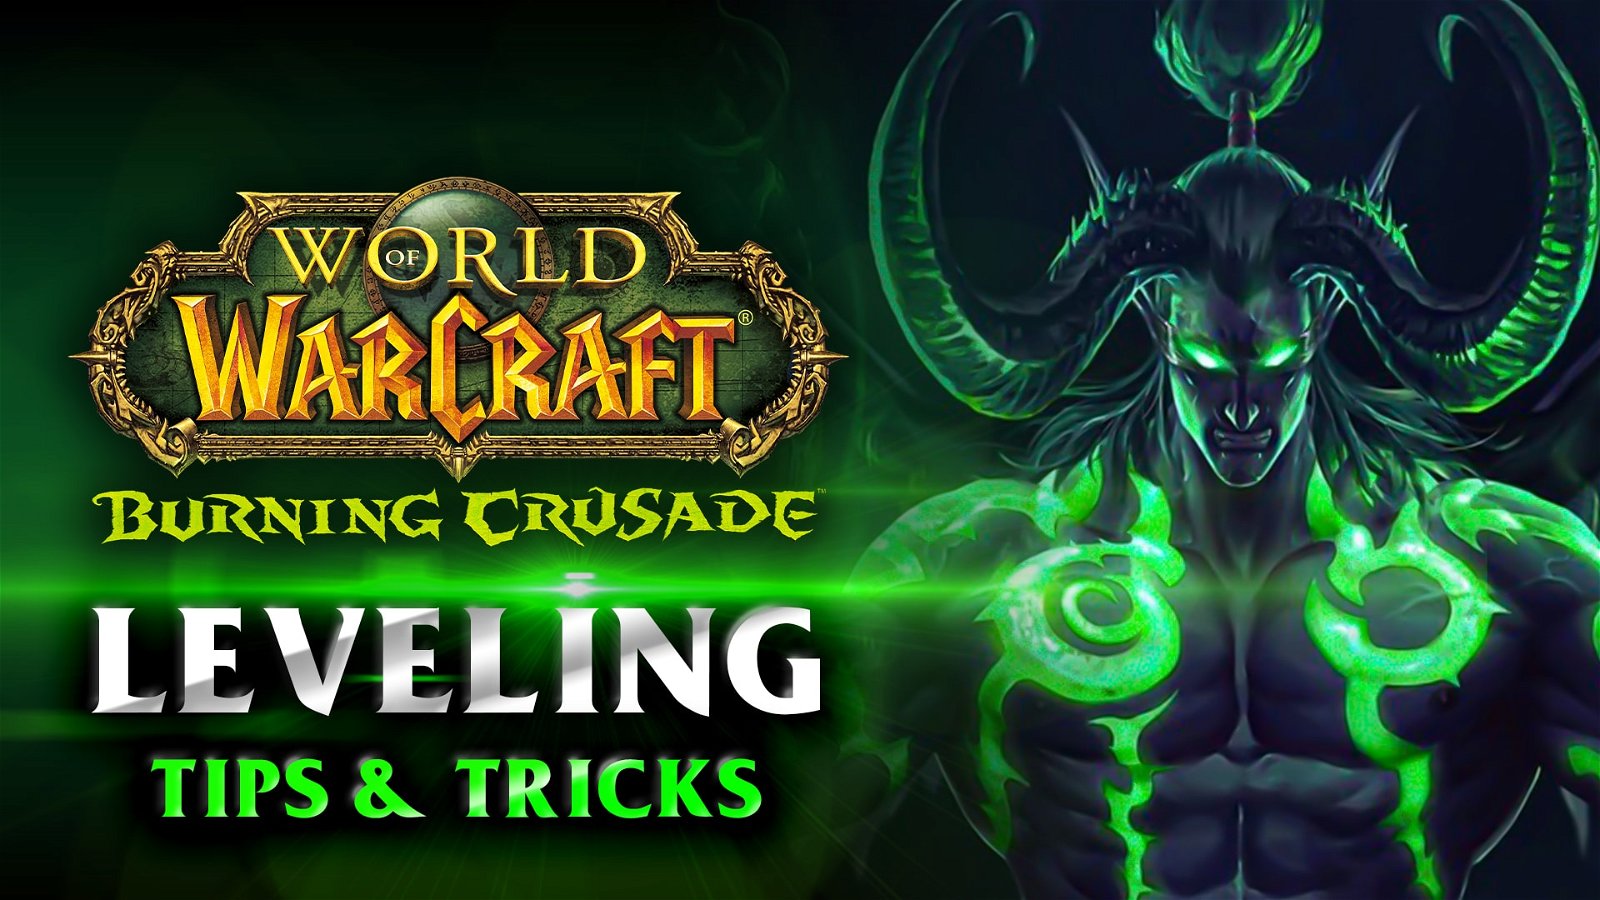 Fast The Burning Crusade 1-70 [Tbc Leveling Guide]